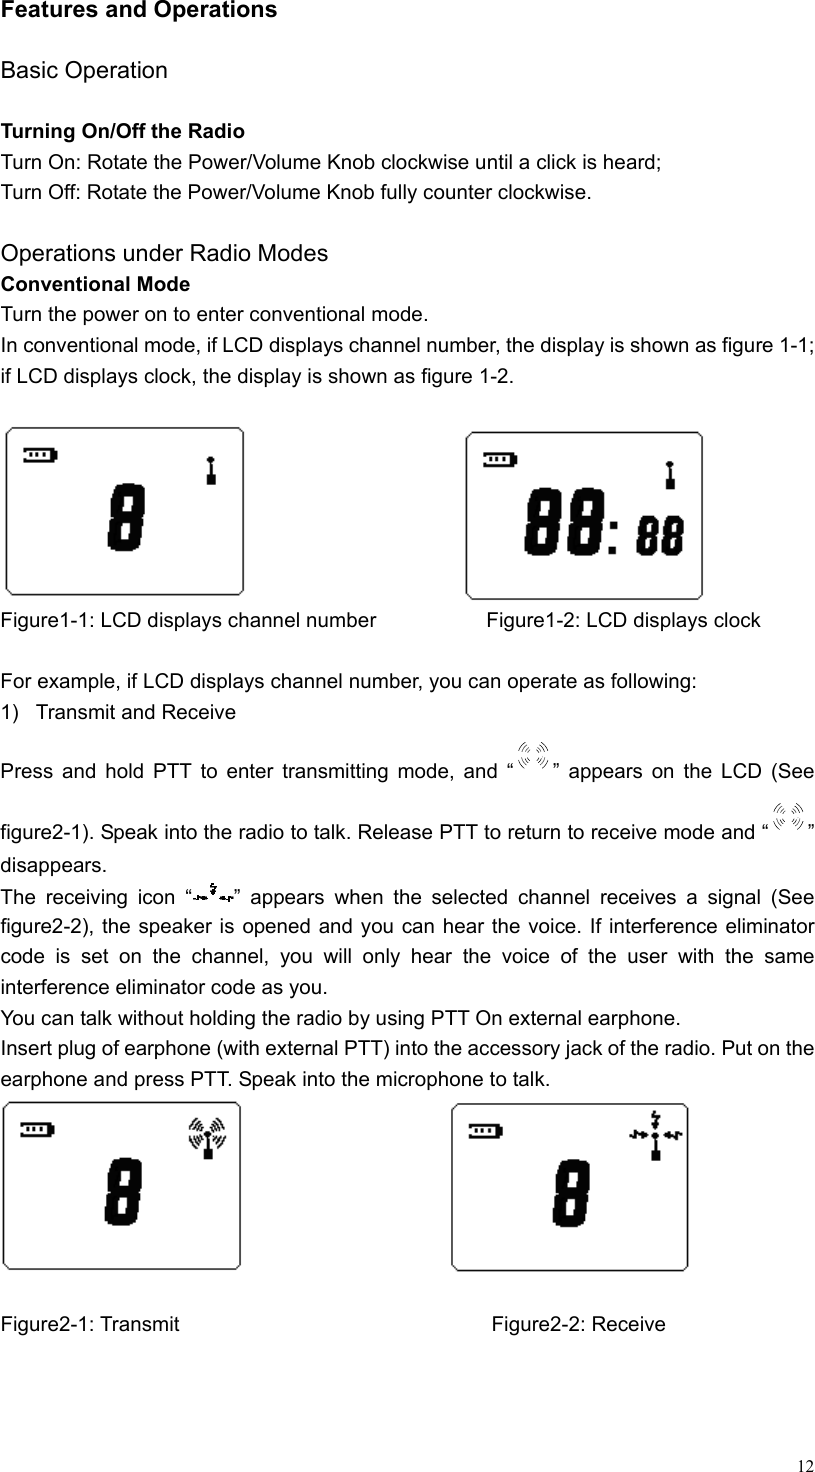  12Features and Operations  Basic Operation  Turning On/Off the Radio Turn On: Rotate the Power/Volume Knob clockwise until a click is heard; Turn Off: Rotate the Power/Volume Knob fully counter clockwise.  Operations under Radio Modes Conventional Mode Turn the power on to enter conventional mode. In conventional mode, if LCD displays channel number, the display is shown as figure 1-1; if LCD displays clock, the display is shown as figure 1-2.                                 Figure1-1: LCD displays channel number            Figure1-2: LCD displays clock  For example, if LCD displays channel number, you can operate as following:   1) Transmit and Receive Press and hold PTT to enter transmitting mode, and “ ” appears on the LCD (See figure2-1). Speak into the radio to talk. Release PTT to return to receive mode and “ ” disappears.  The receiving icon “ ” appears when the selected channel receives a signal (See figure2-2), the speaker is opened and you can hear the voice. If interference eliminator code is set on the channel, you will only hear the voice of the user with the same interference eliminator code as you. You can talk without holding the radio by using PTT On external earphone. Insert plug of earphone (with external PTT) into the accessory jack of the radio. Put on the earphone and press PTT. Speak into the microphone to talk.                          Figure2-1: Transmit                                  Figure2-2: Receive 